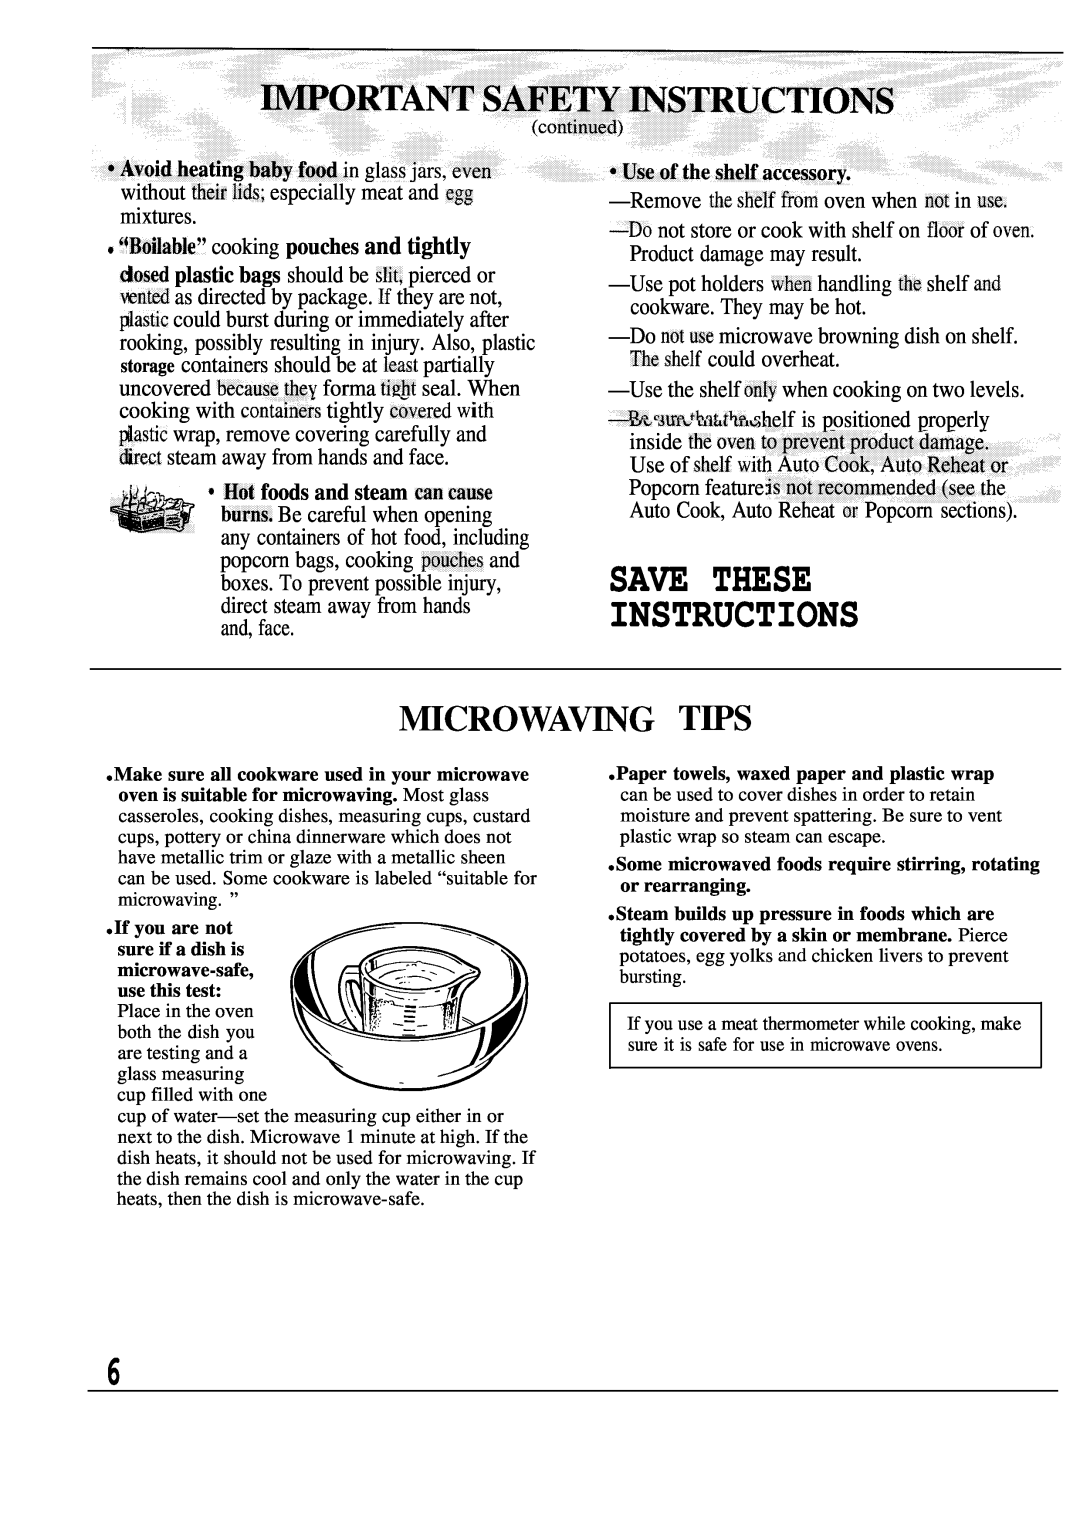 GE Monogram ZW2000 manual Save These Instructions, MICROWAVmG T~S, ‘‘~z ~ Hot foods and steam can cause 